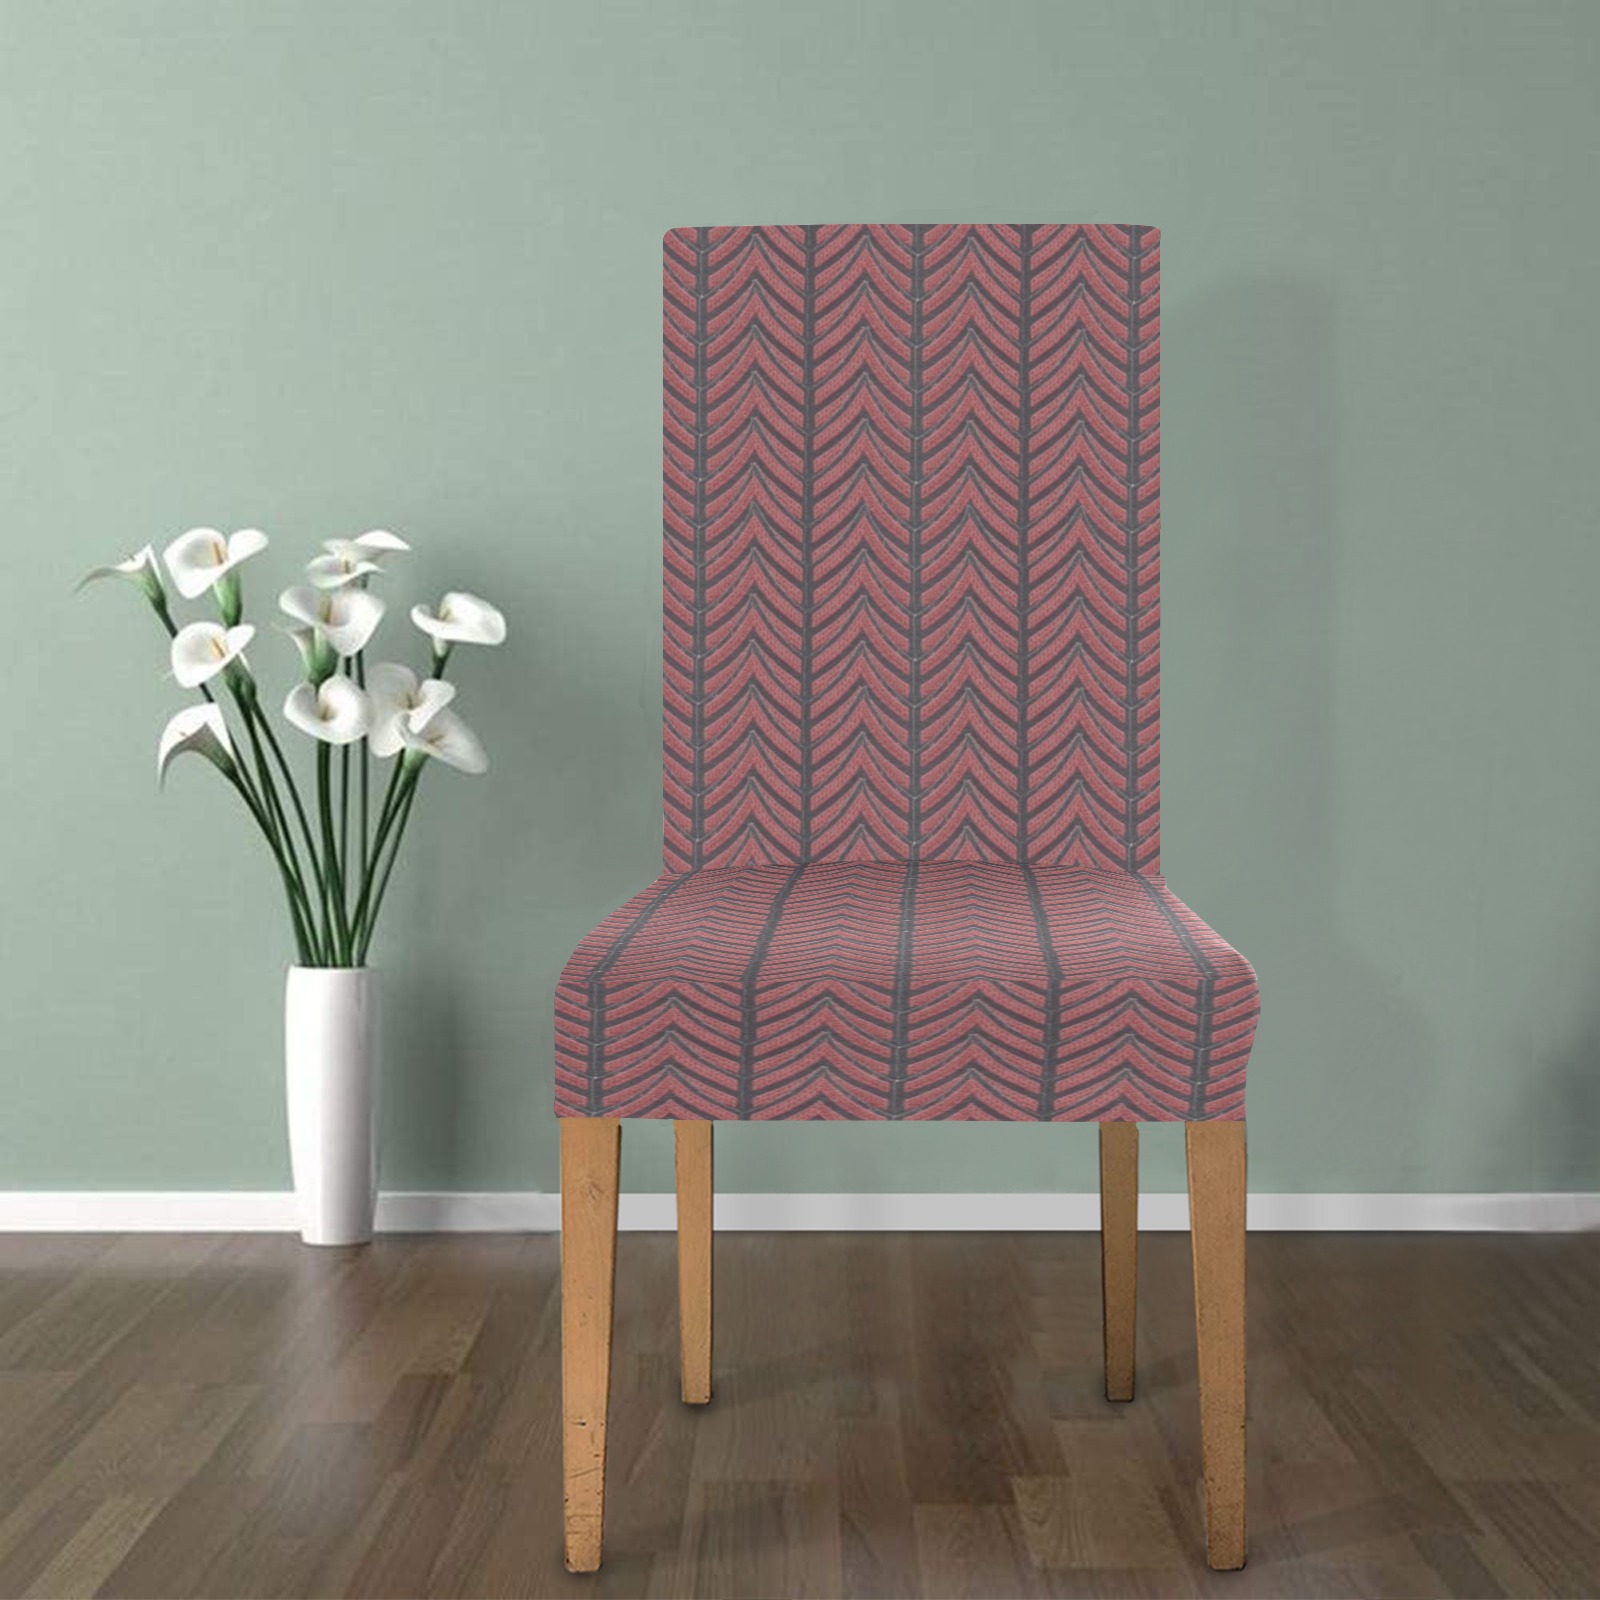 chevrons bruns Removable Dining Chair Cover